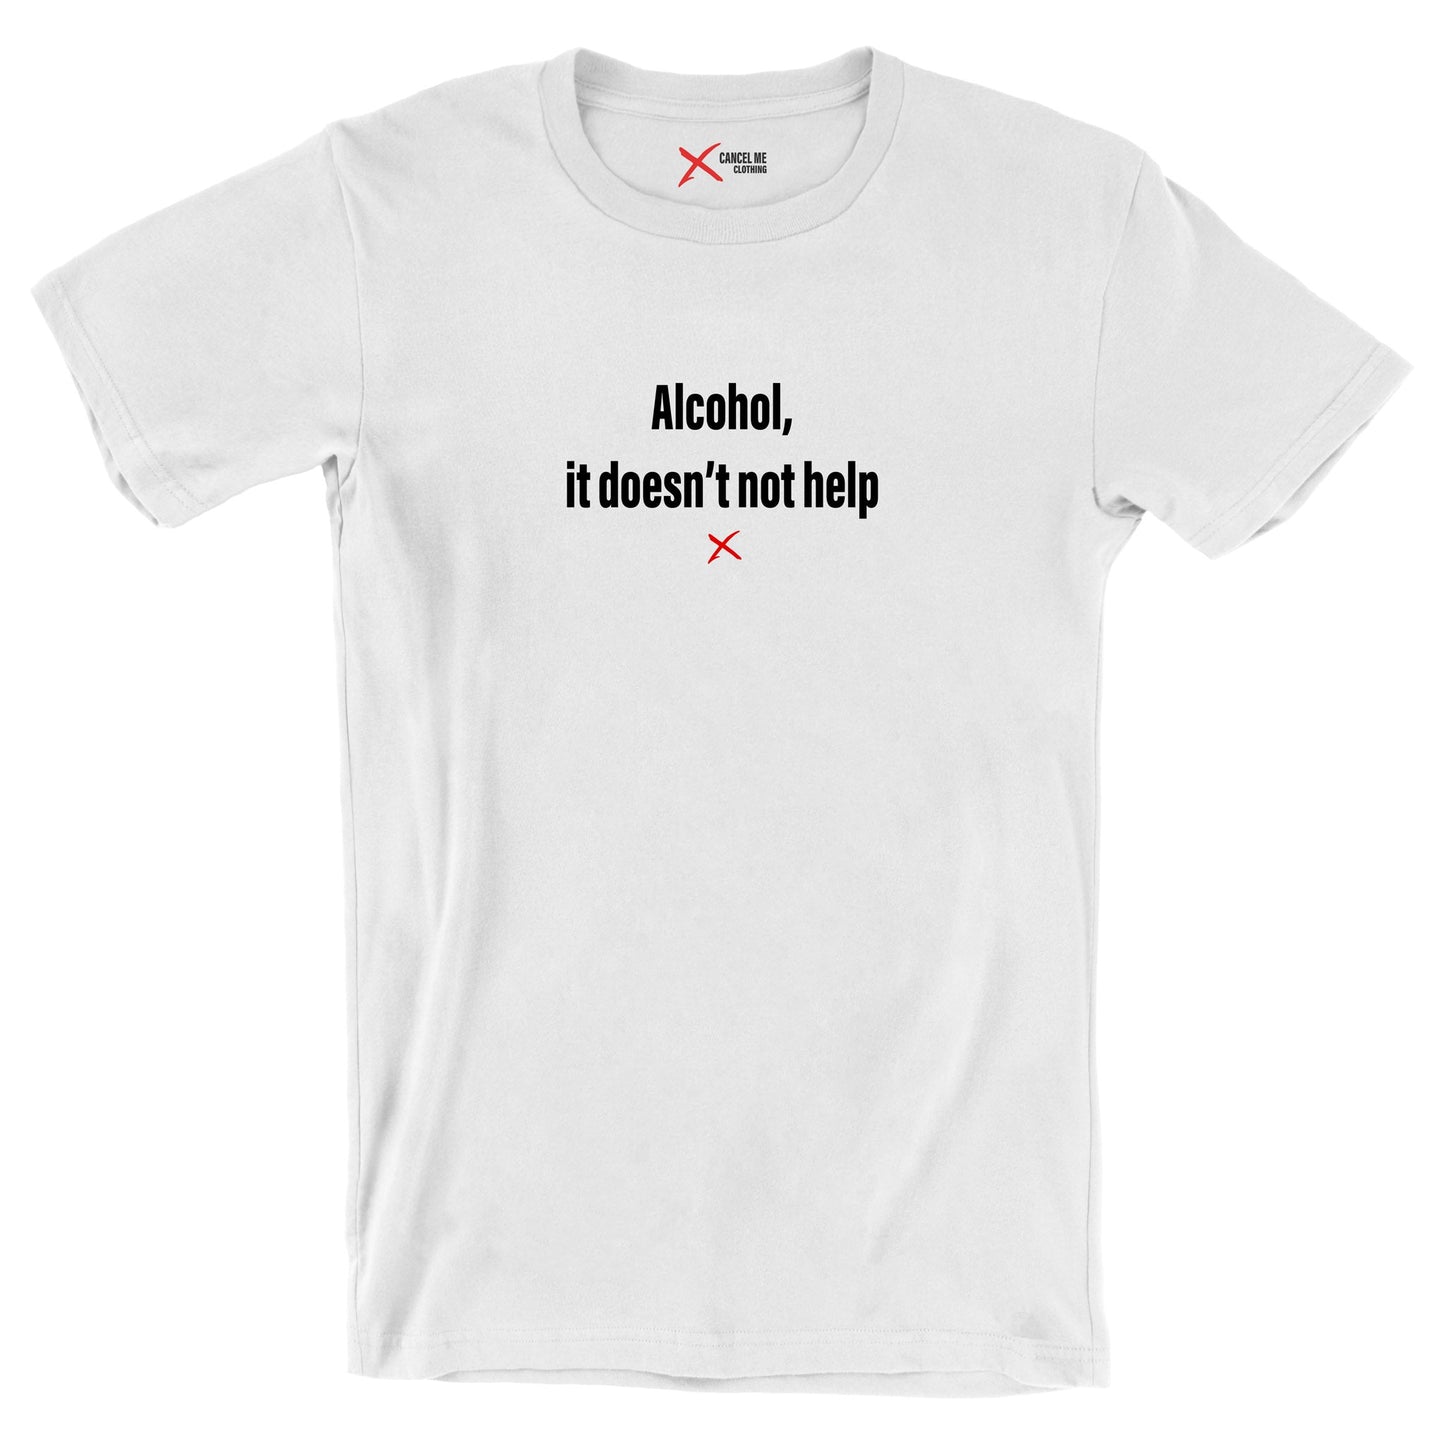 Alcohol, it doesn't not help - Shirt